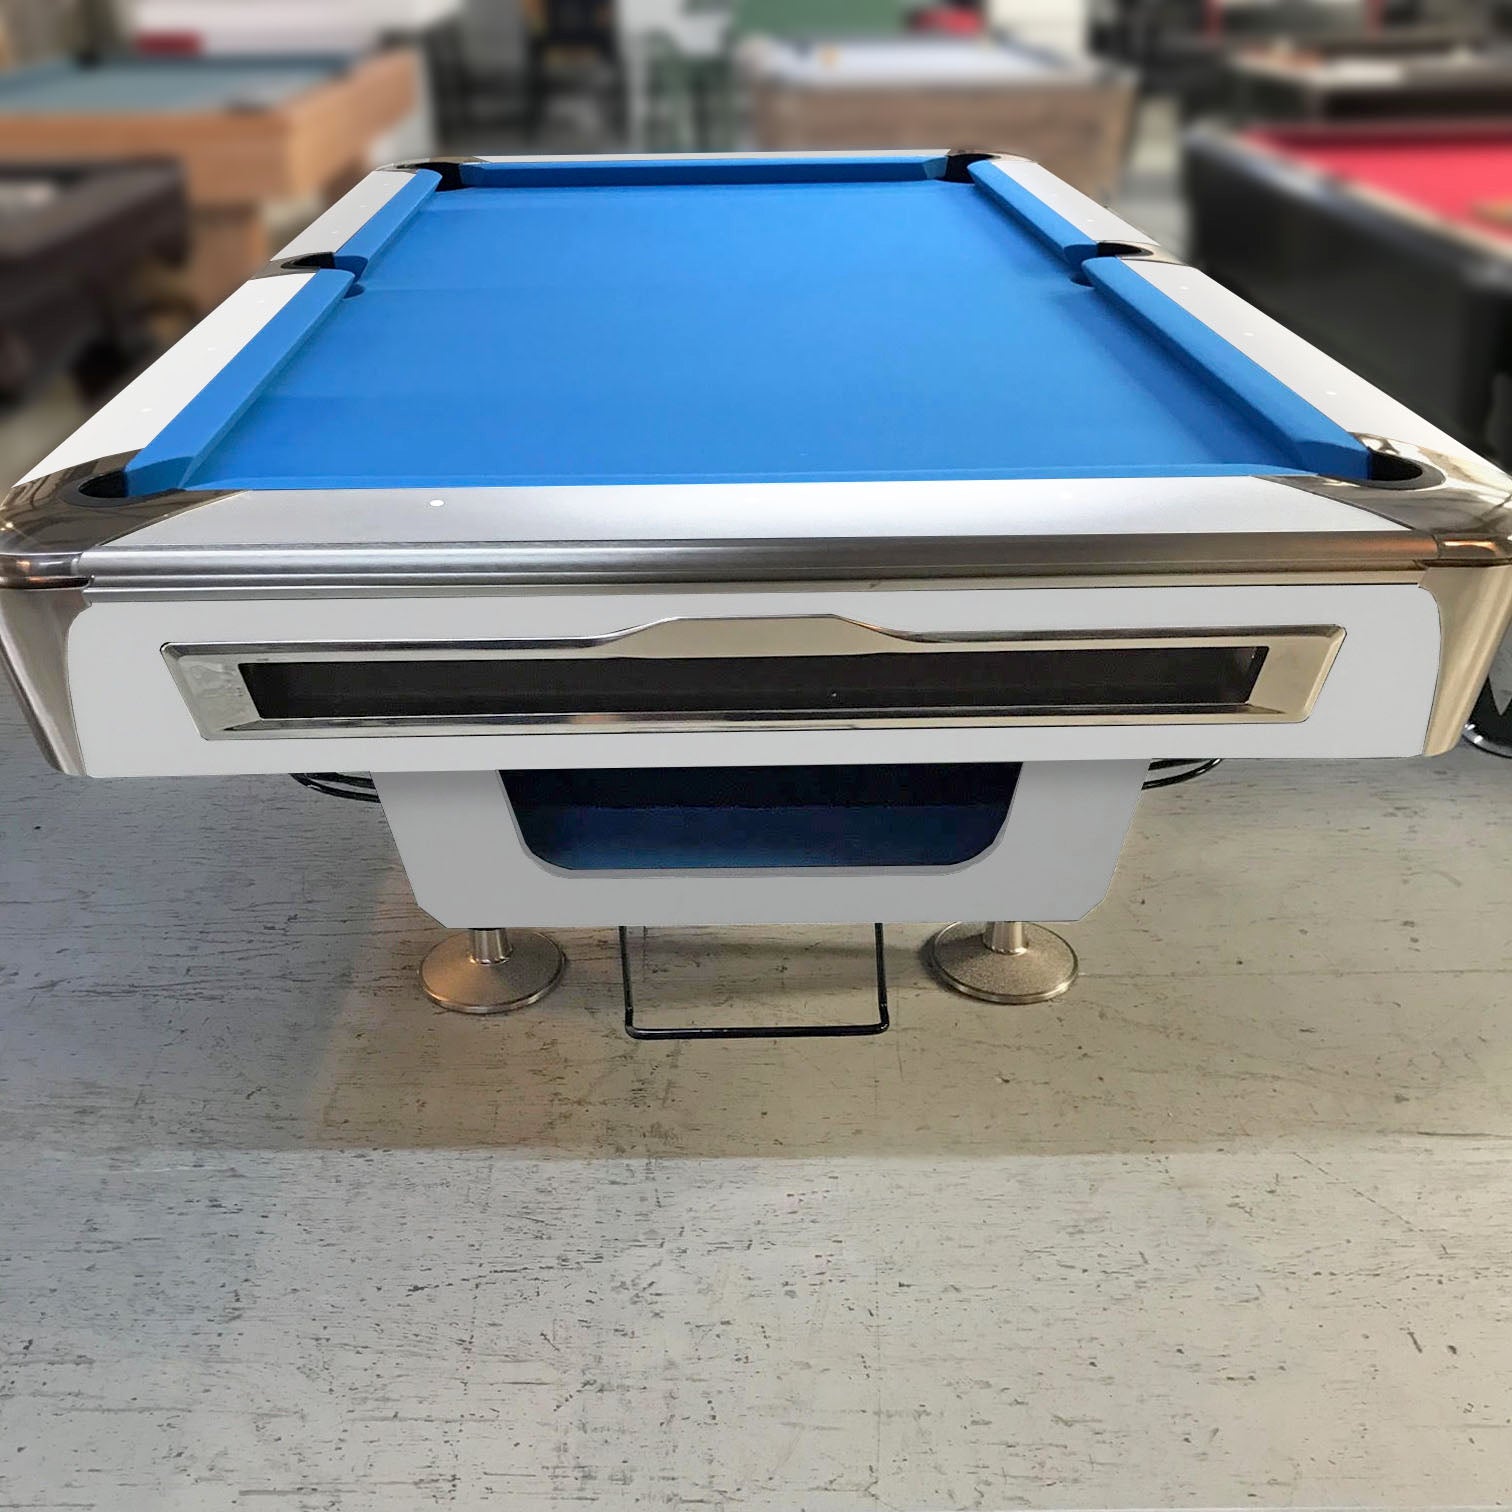 Proline 8ft American Pool Table White Deluxe